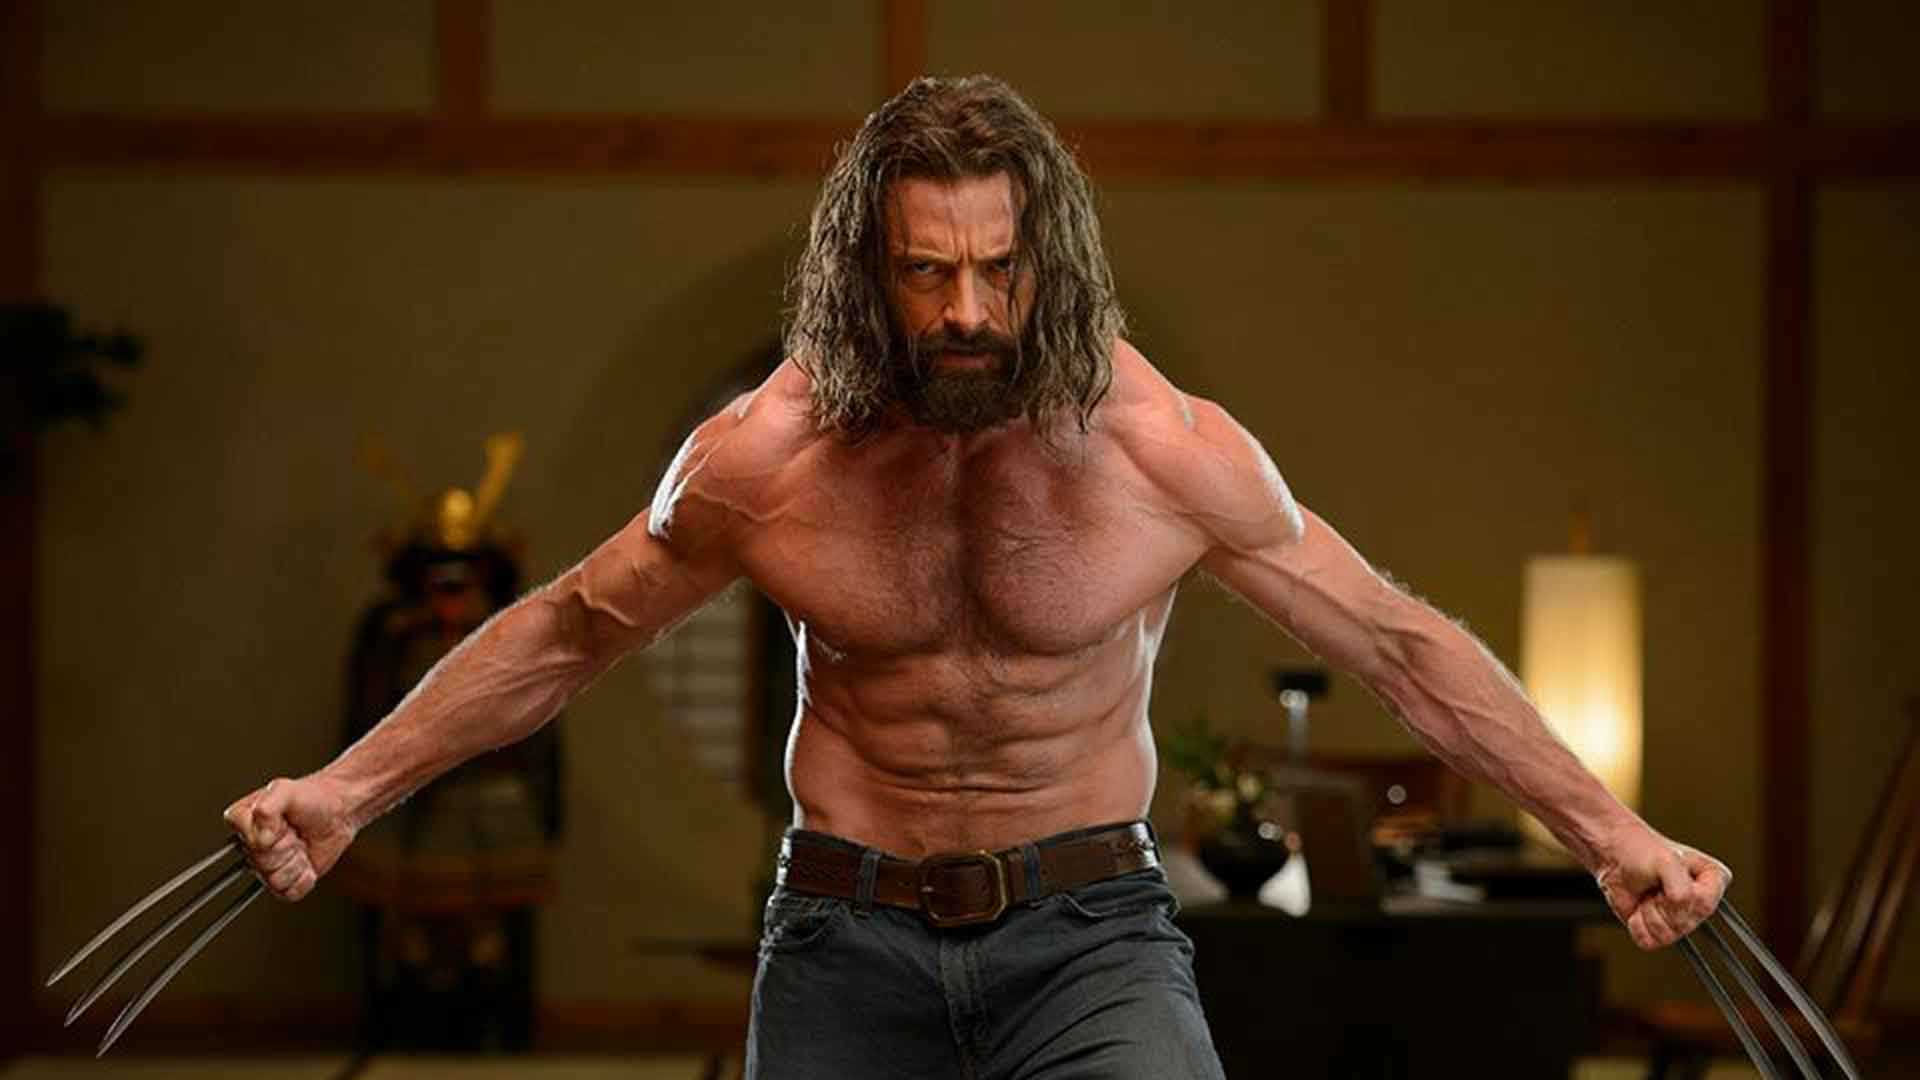 Hugh Jackman says he is open to playing Wolverine in the MCU after Deadpool 3